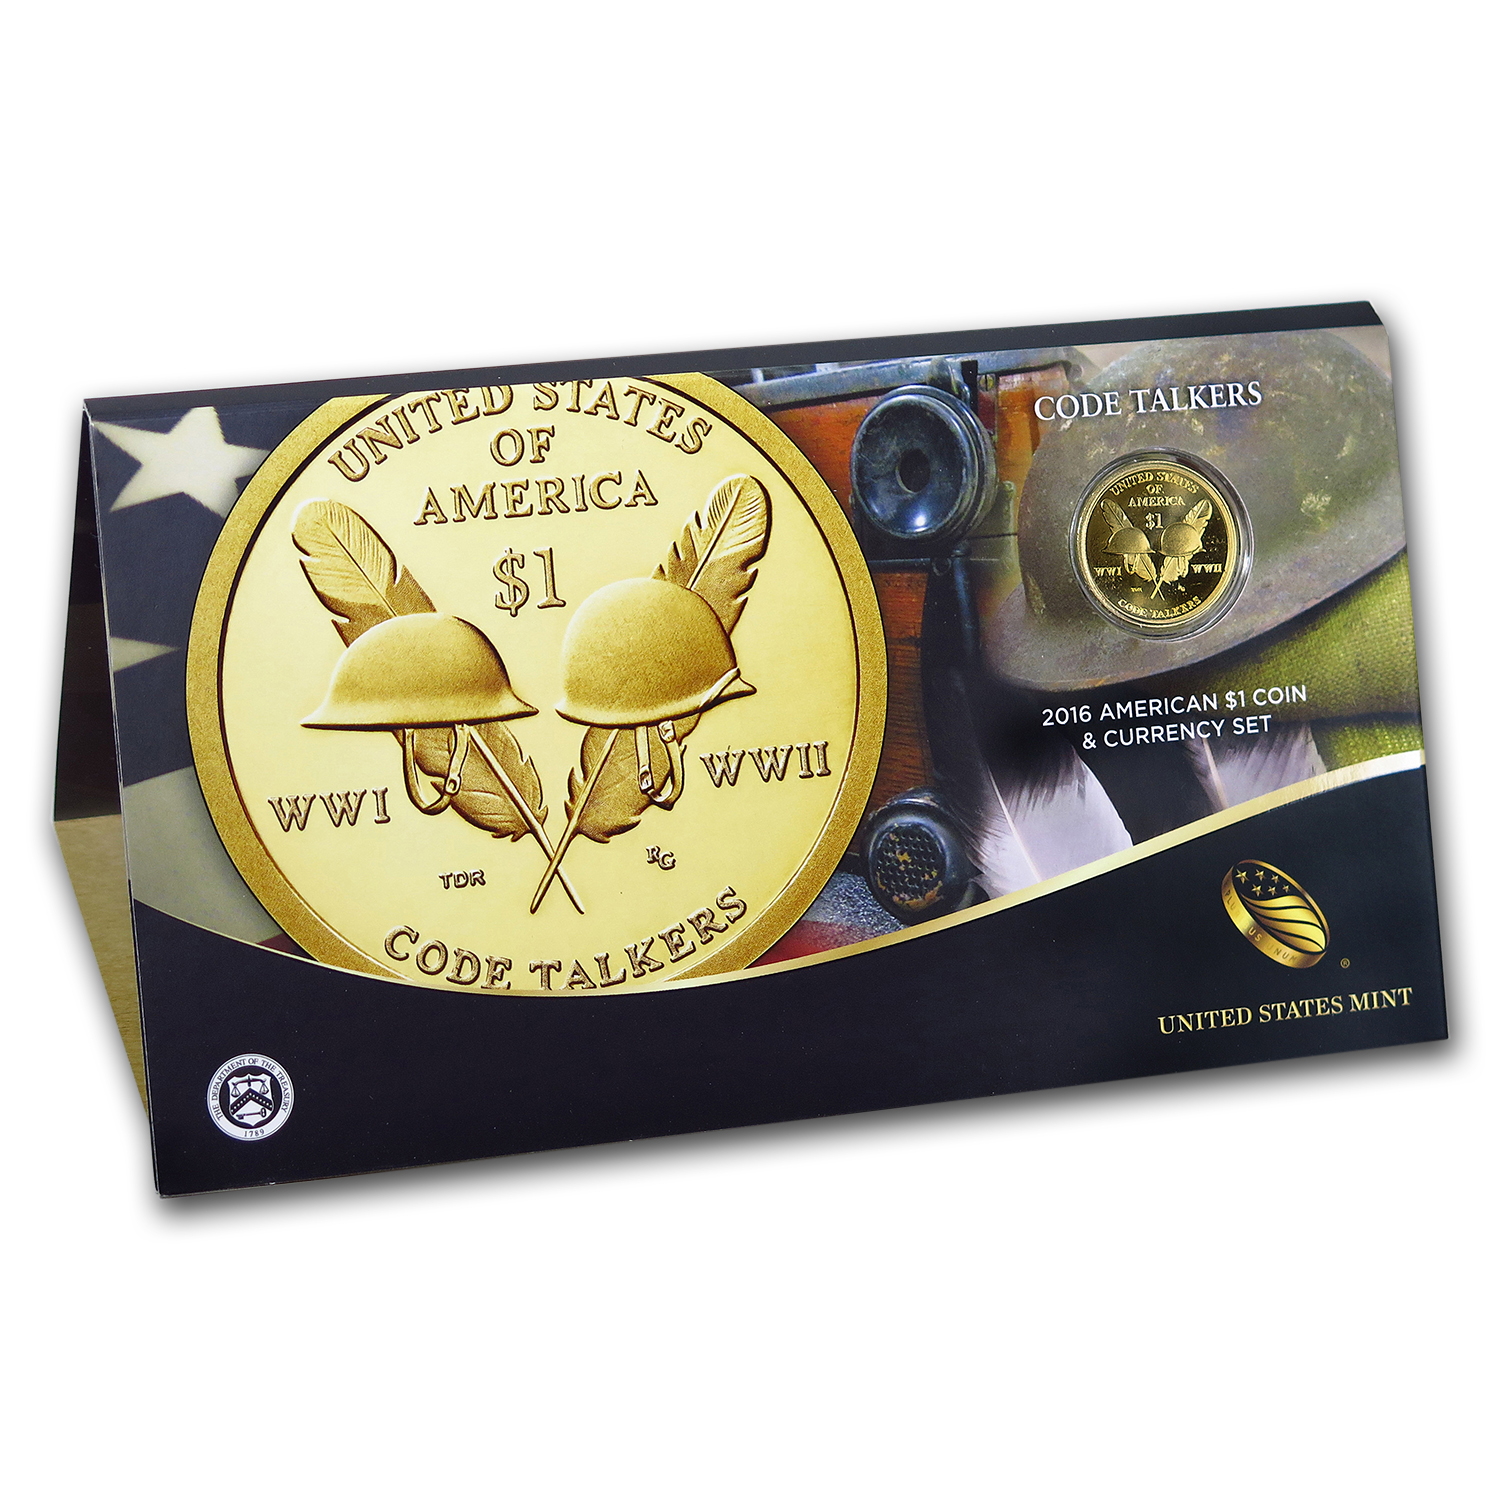 Buy 2016 U.S. Code Talkers Coin and Currency Set